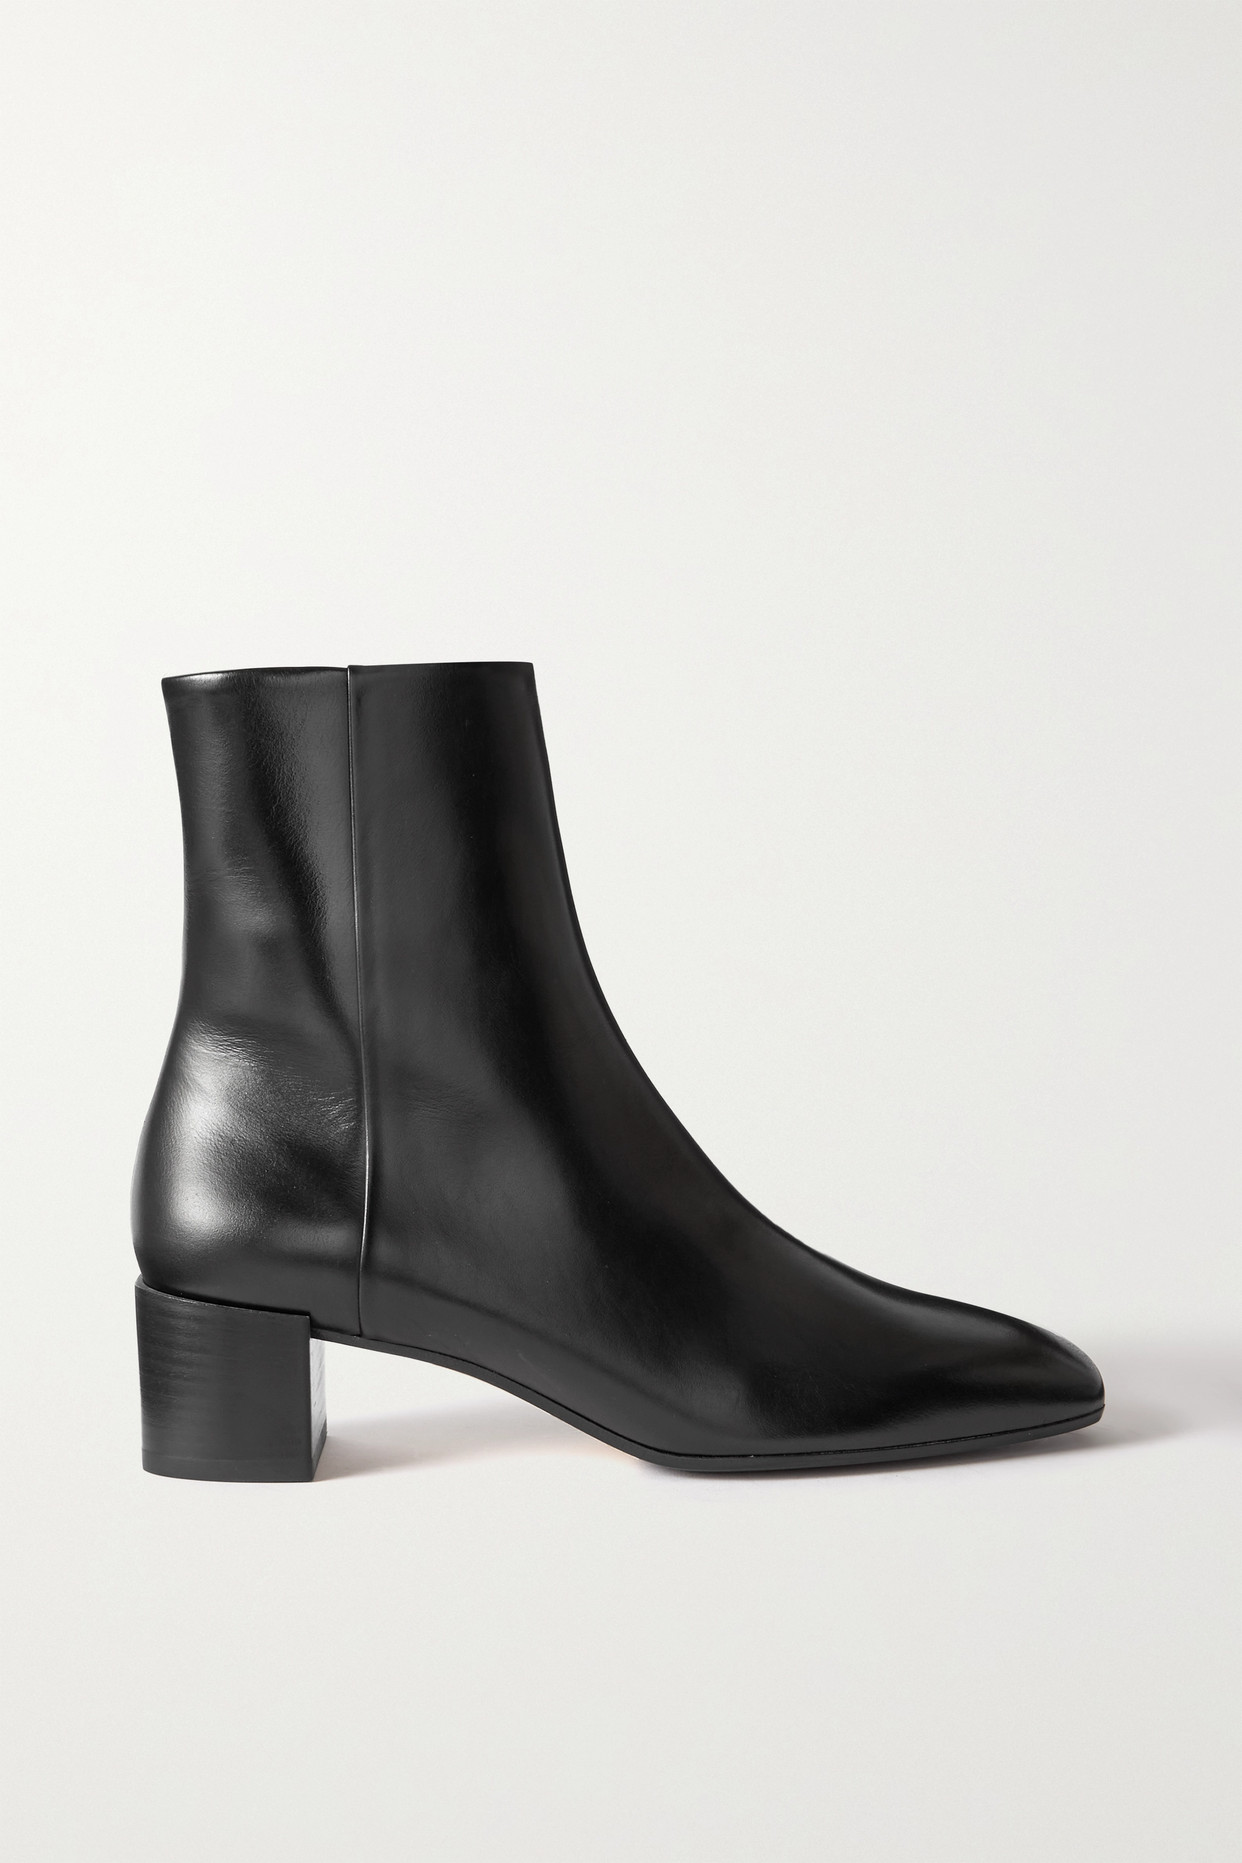 Linn Leather Ankle Boots